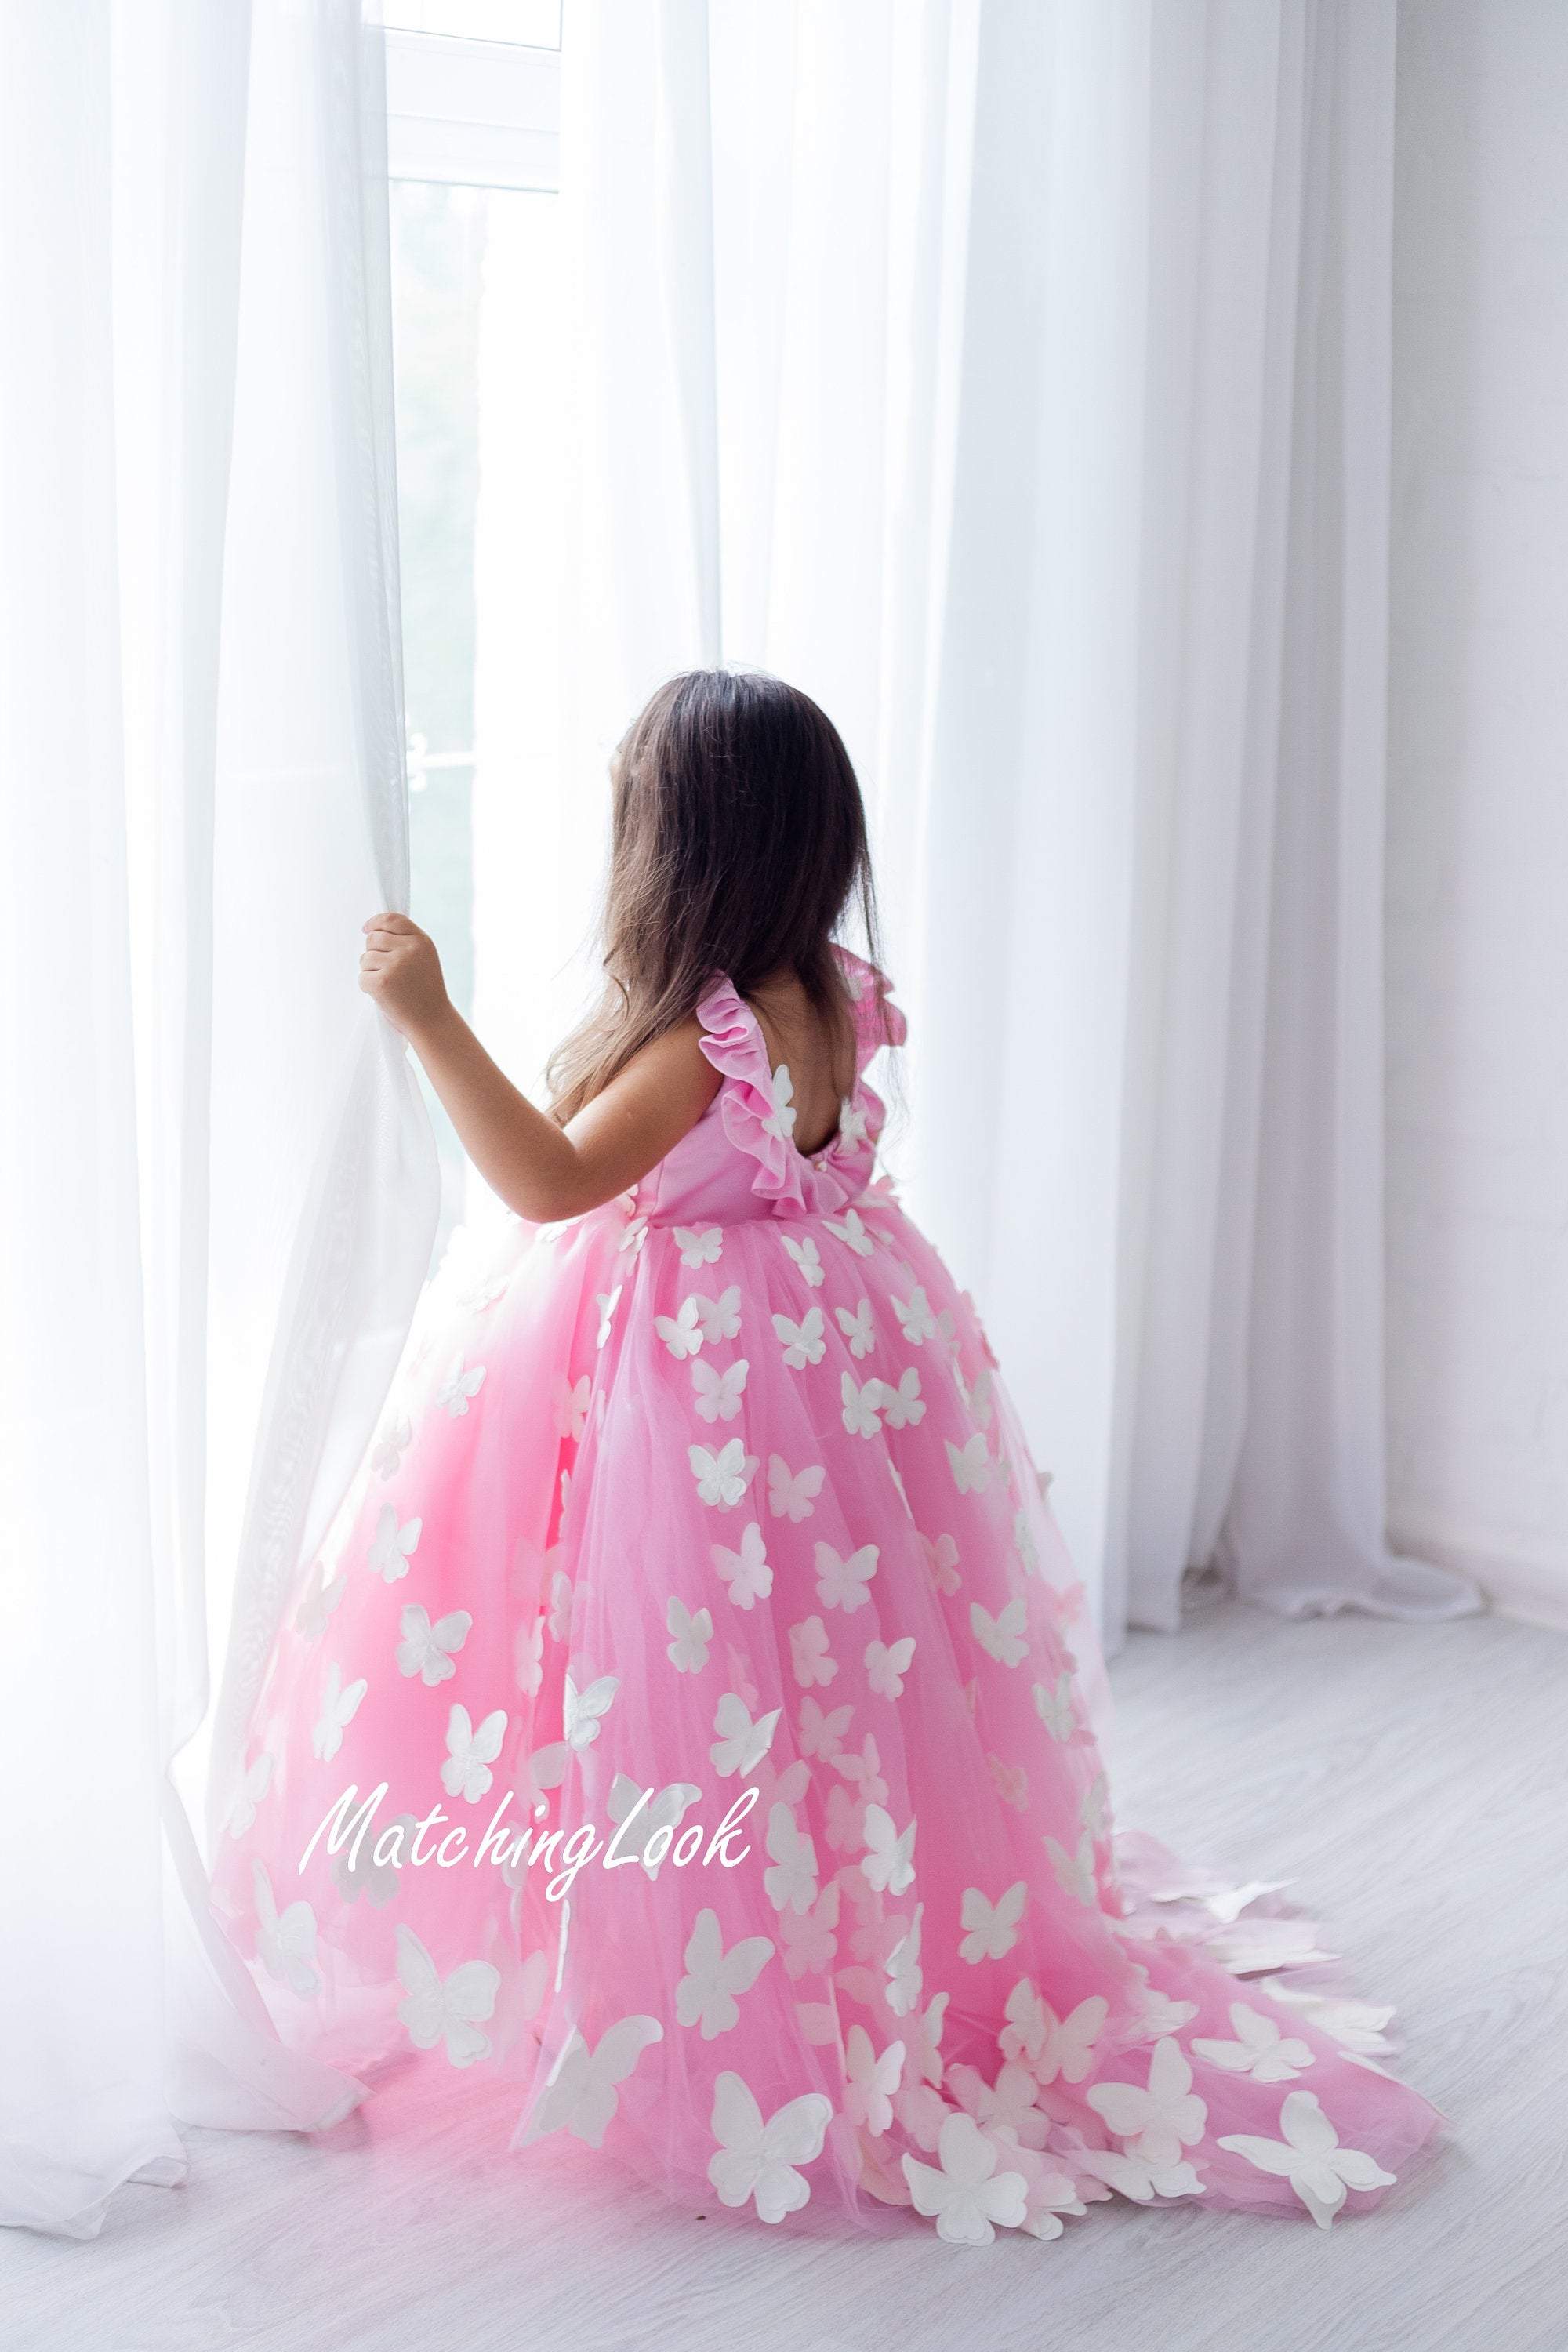 MELDVDIB Girls Party Gown Ball Dresses Toddler Girls Temperament  Minimalistic Bowknot Embroidered Flower Net Yarn Birthday Party Gown Dresses  Party Gown - Walmart.com